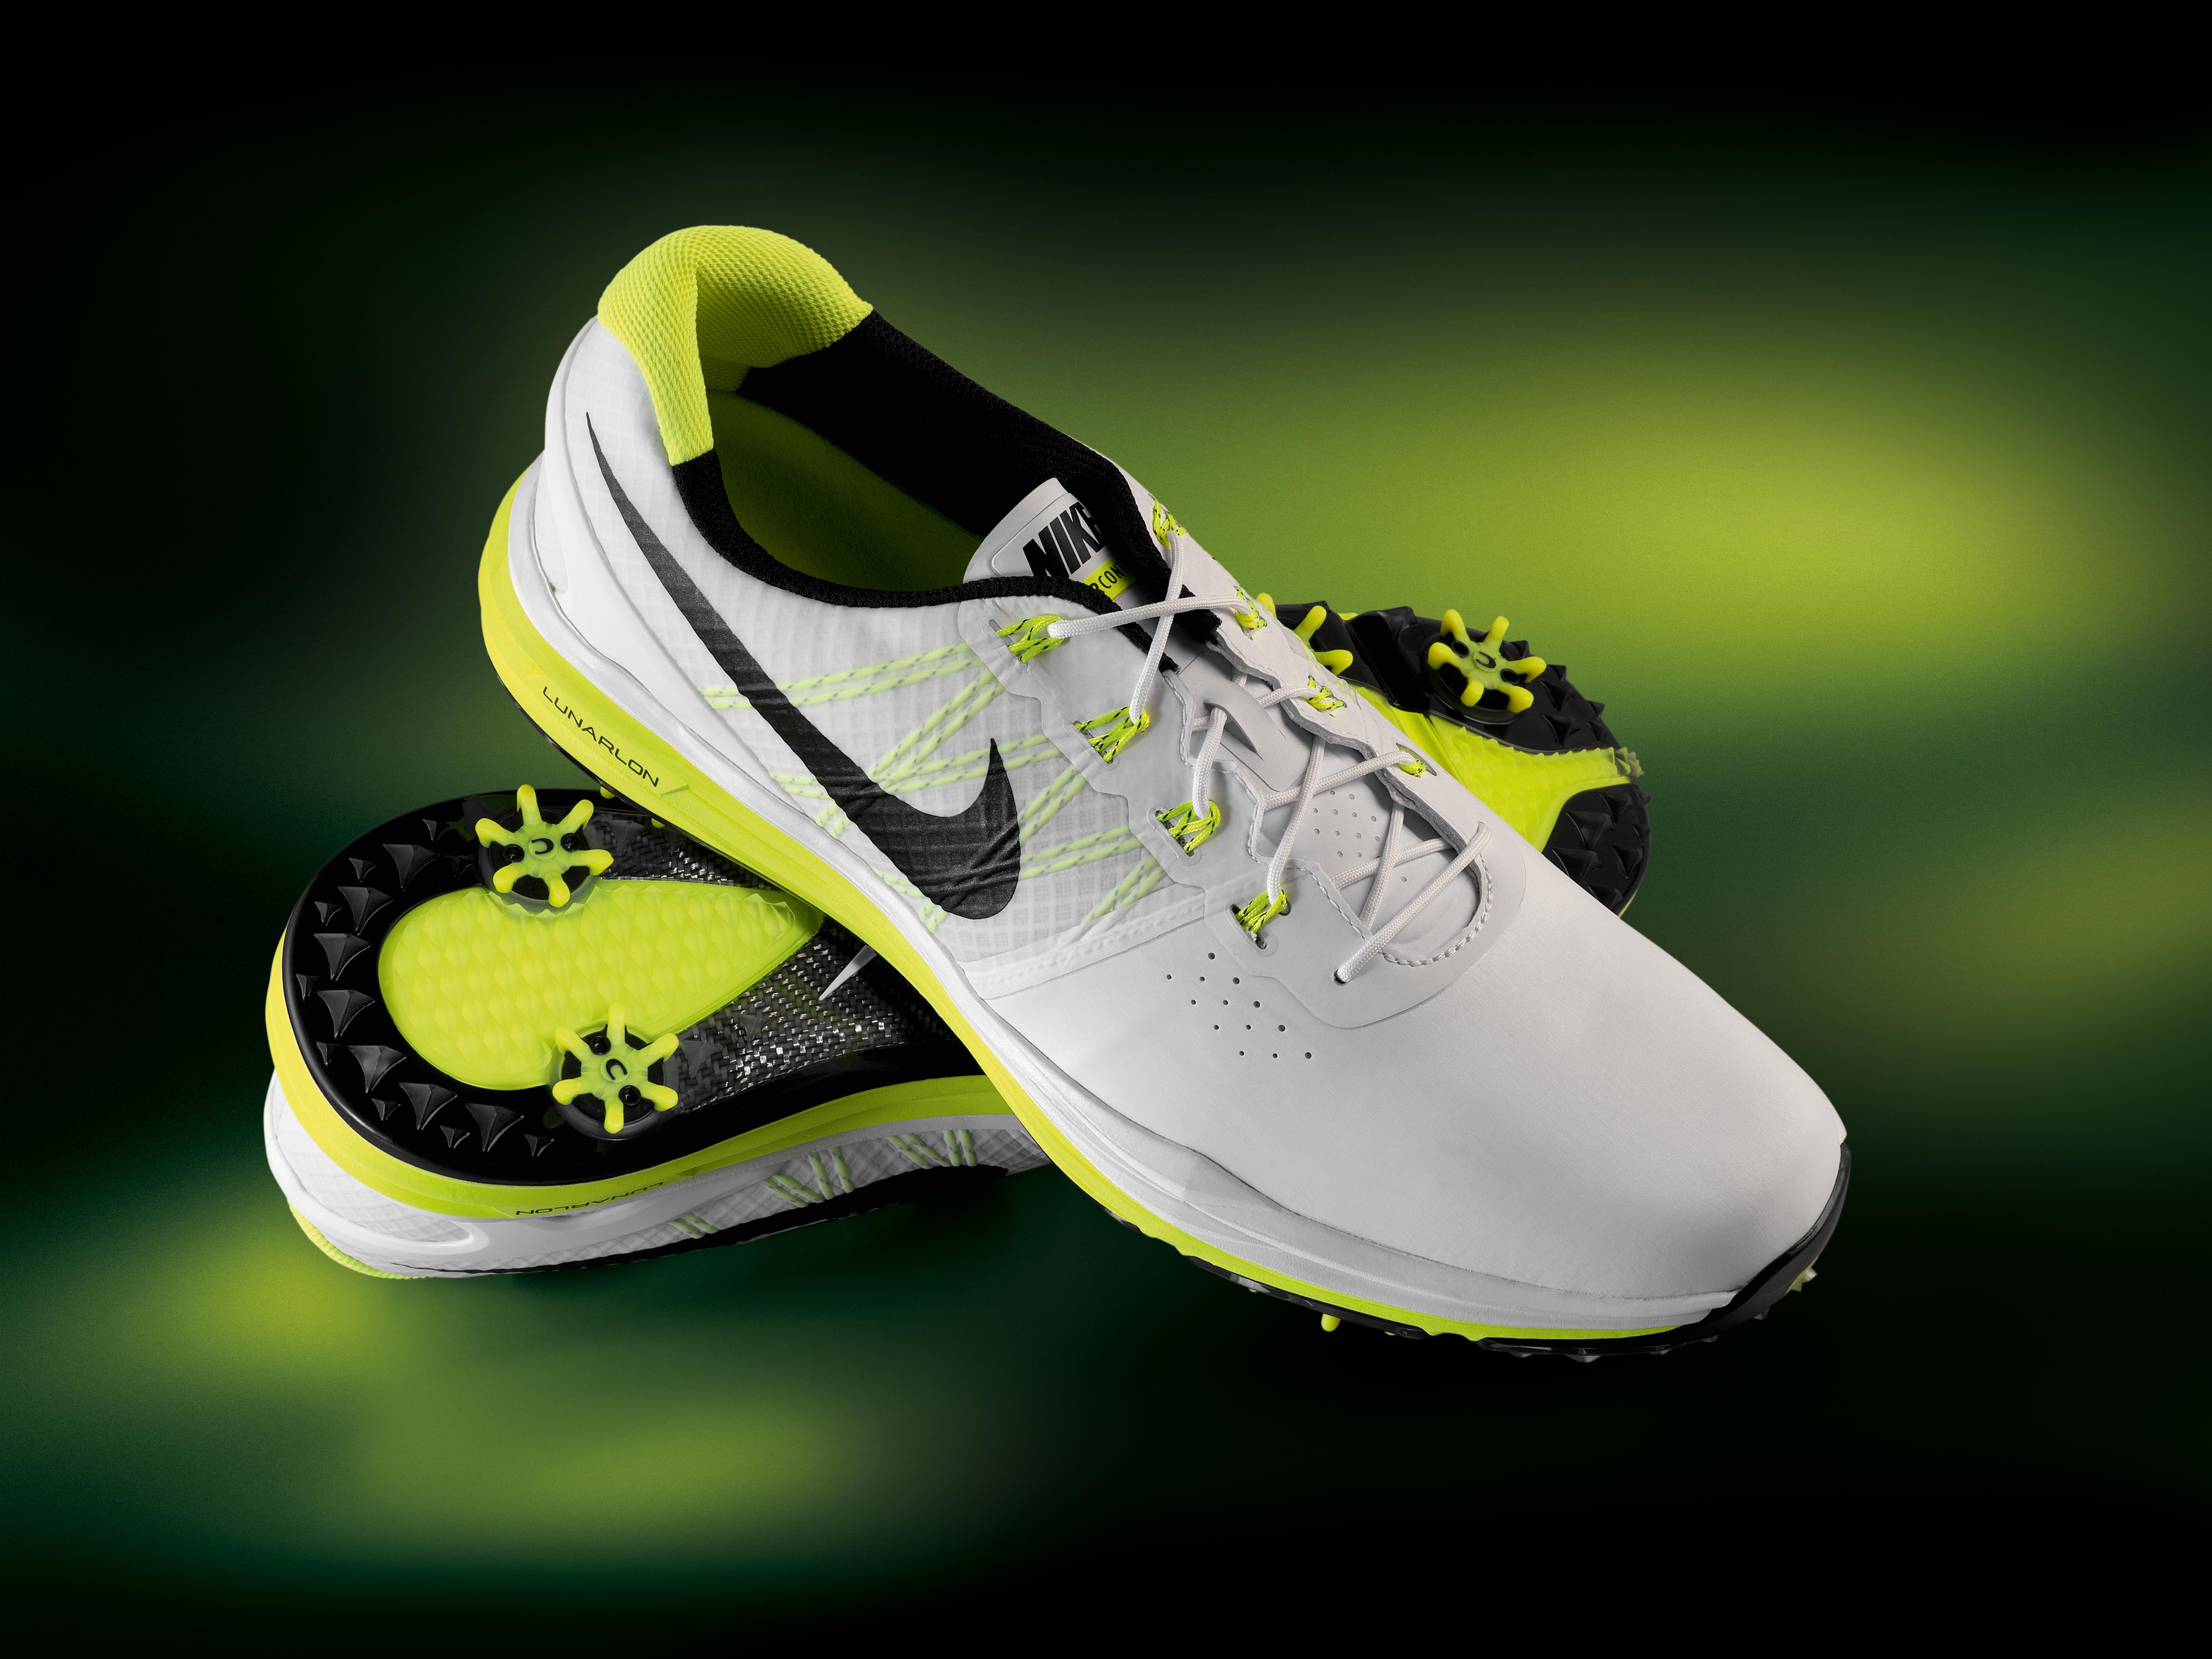 Nike Lunar Control 3 shoe review | Golf Monthly